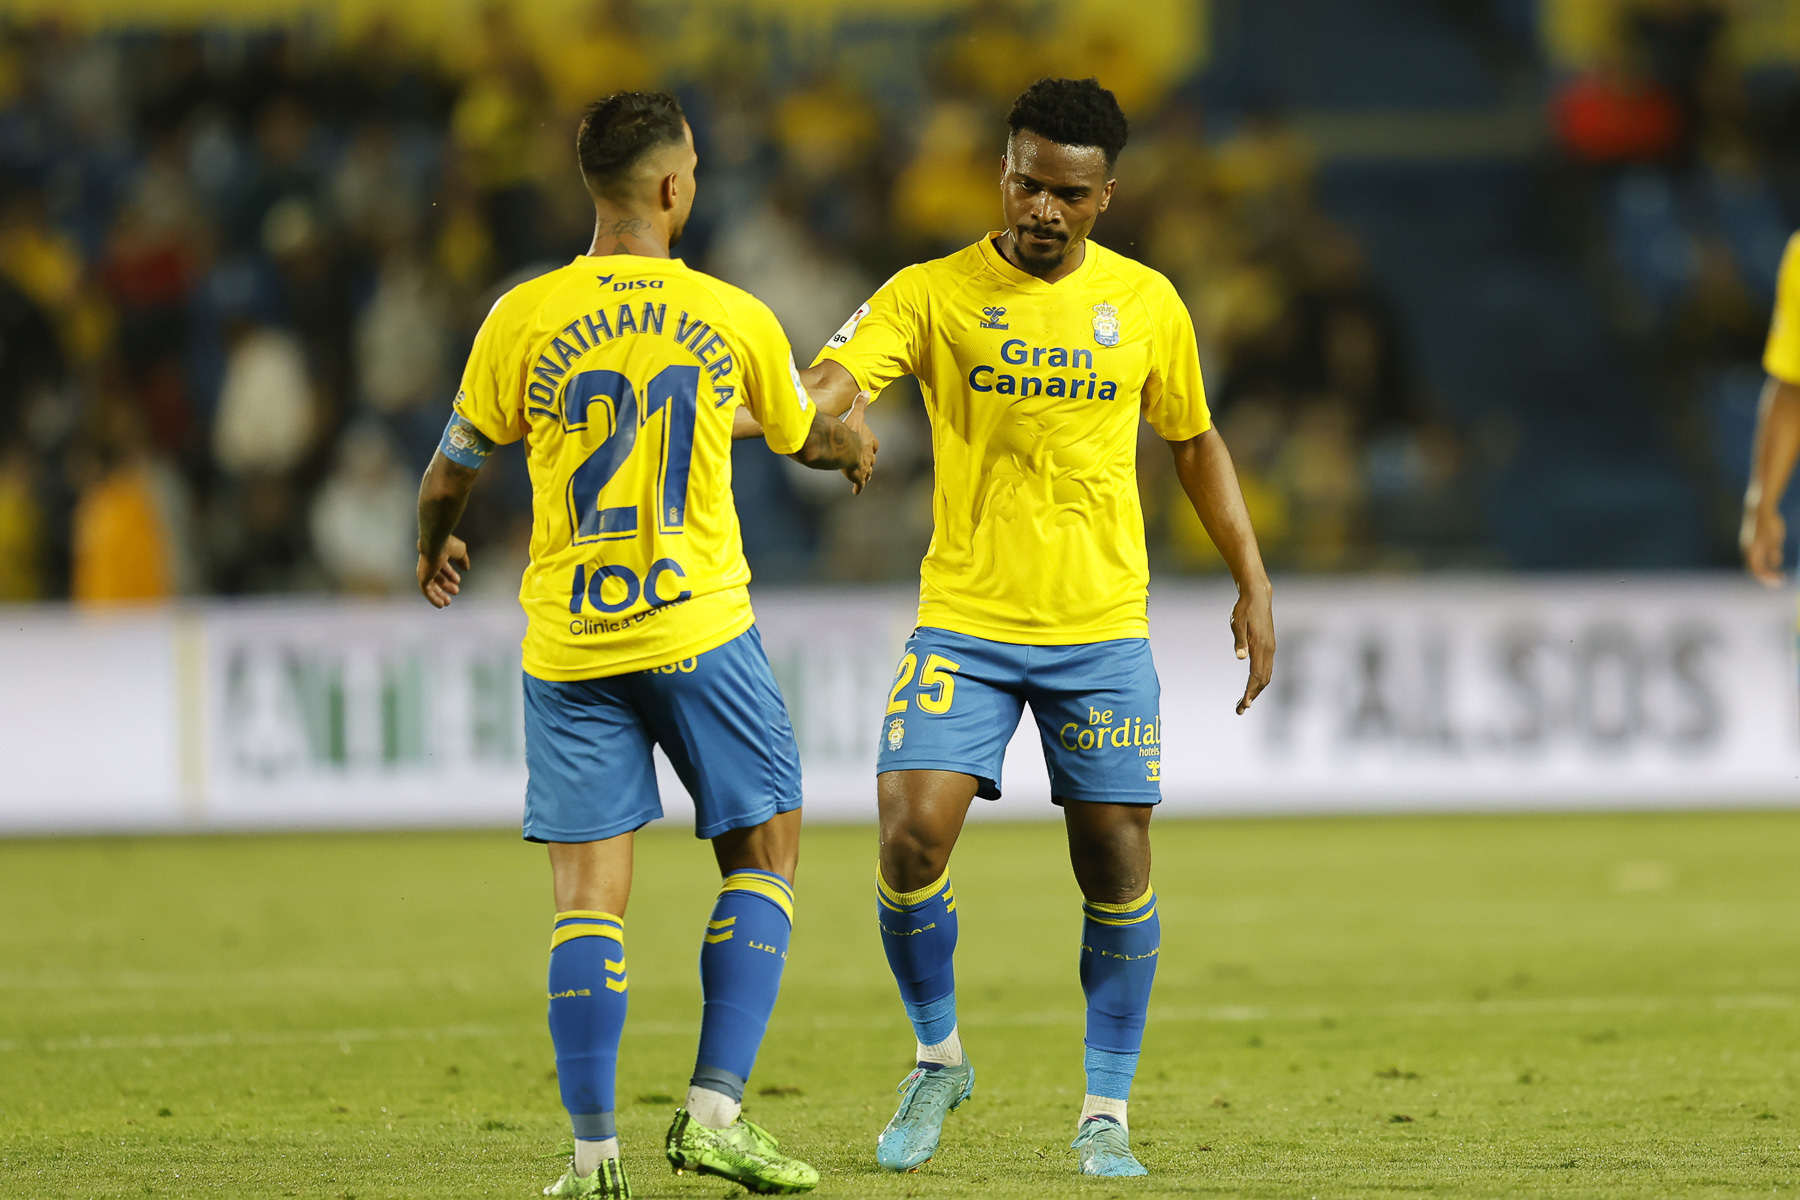 UD Las Palmas tried everything but couldn't find the winning goal  (1-1)